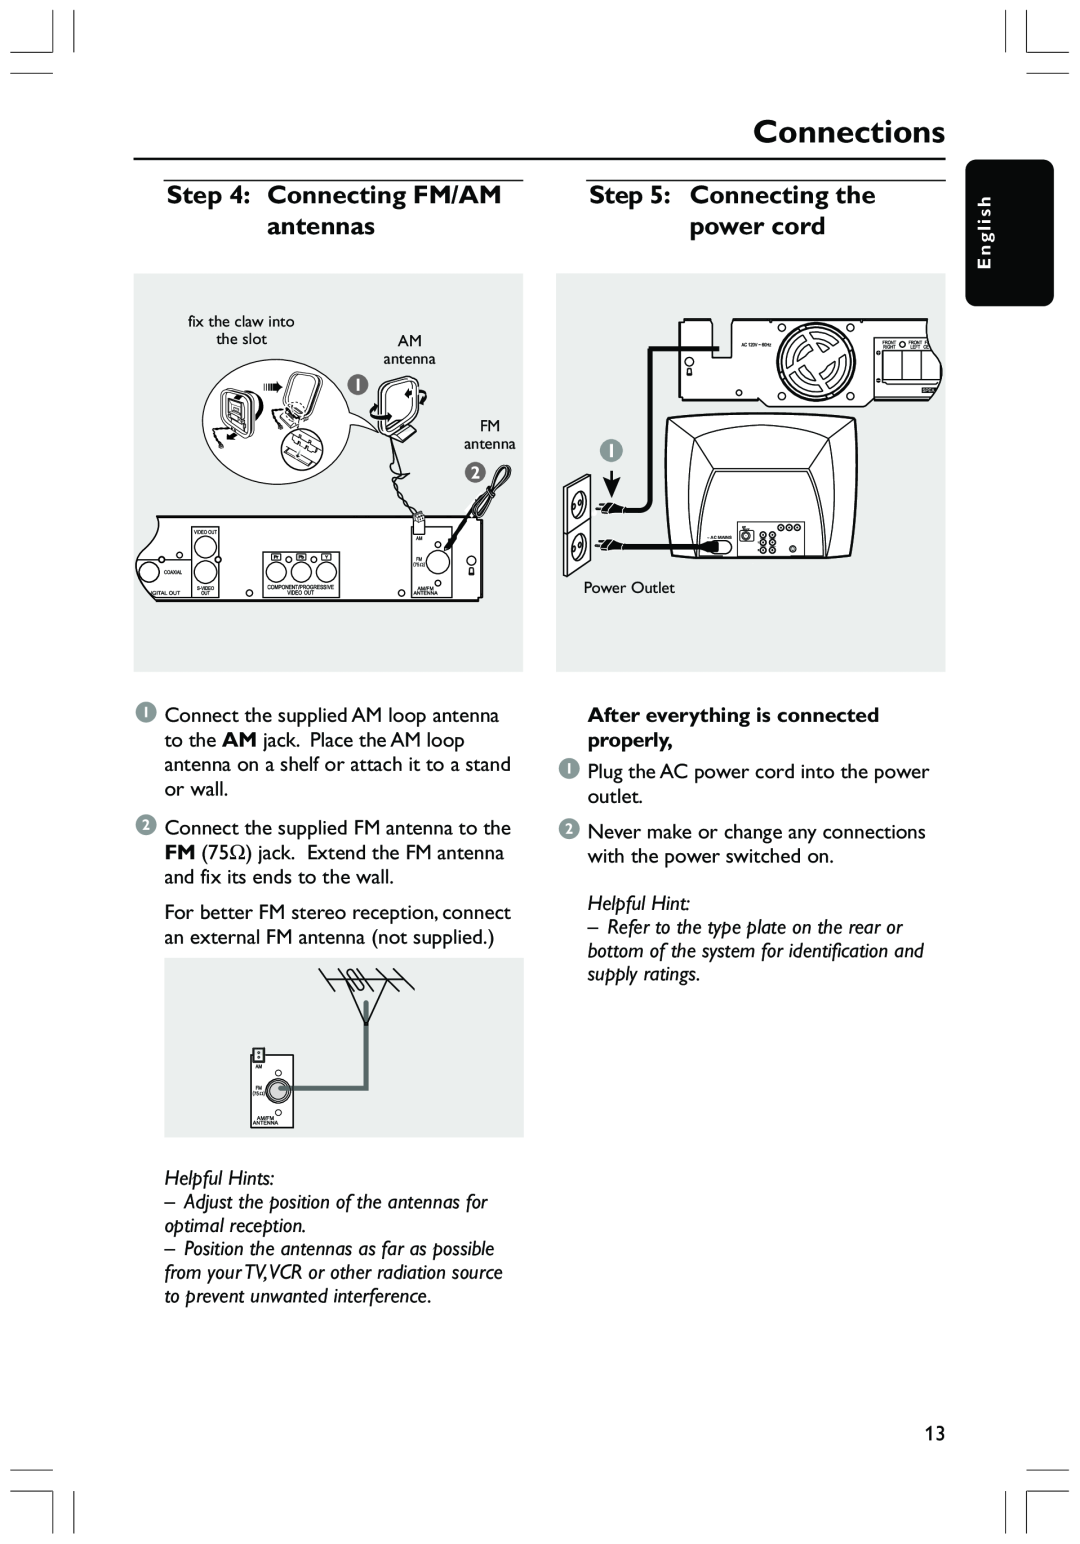 Philips HTS3410D user manual Connecting FM/AM, Connecting the, antennas, power cord, Connections, Helpful Hints 